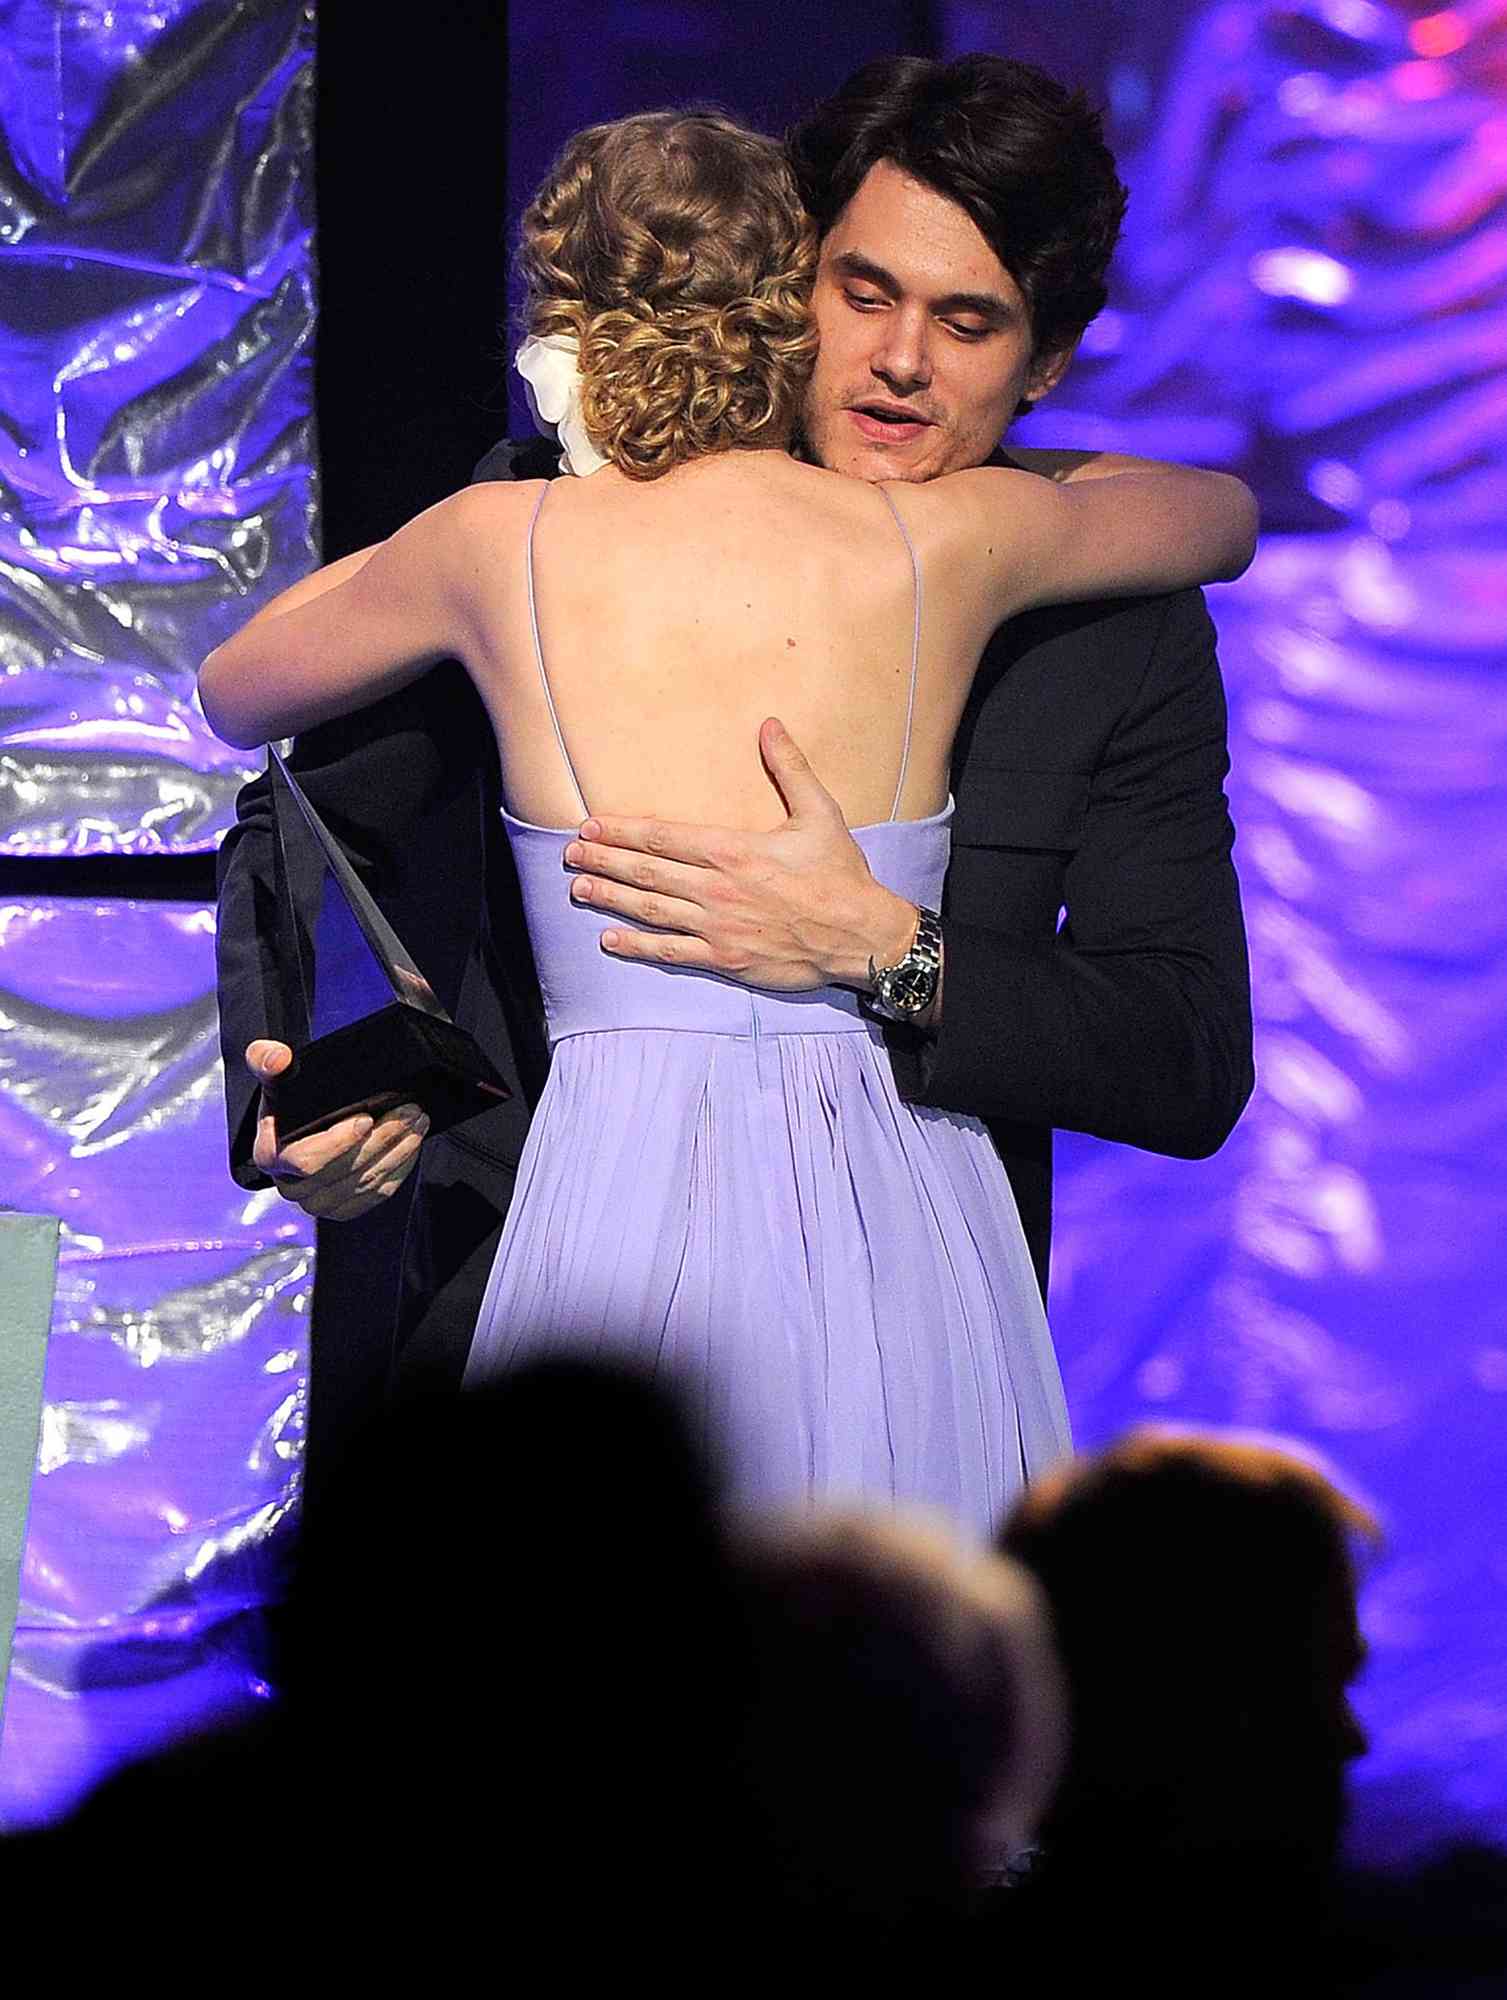 John Mayer and Taylor Swift perform onstage during the 41st Annual Songwriters Hall of Fame Ceremony at The New York Marriott Marquis on June 17, 2010 in New York City